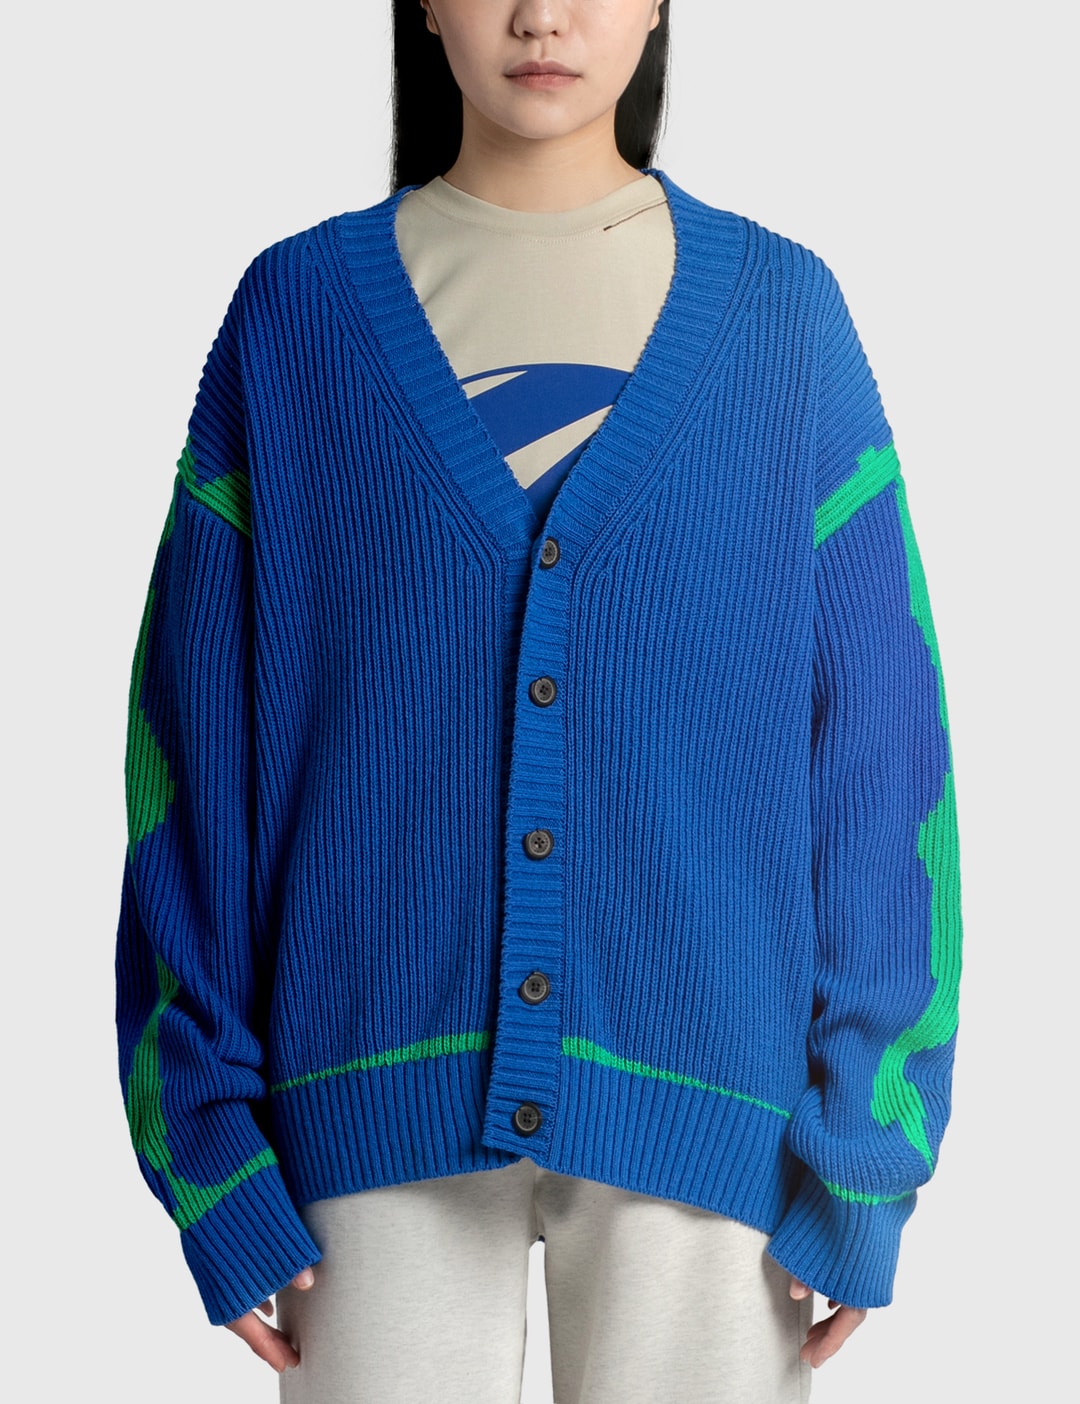 Ader Error - Benny Cardigan | HBX - Globally Curated Fashion and ...